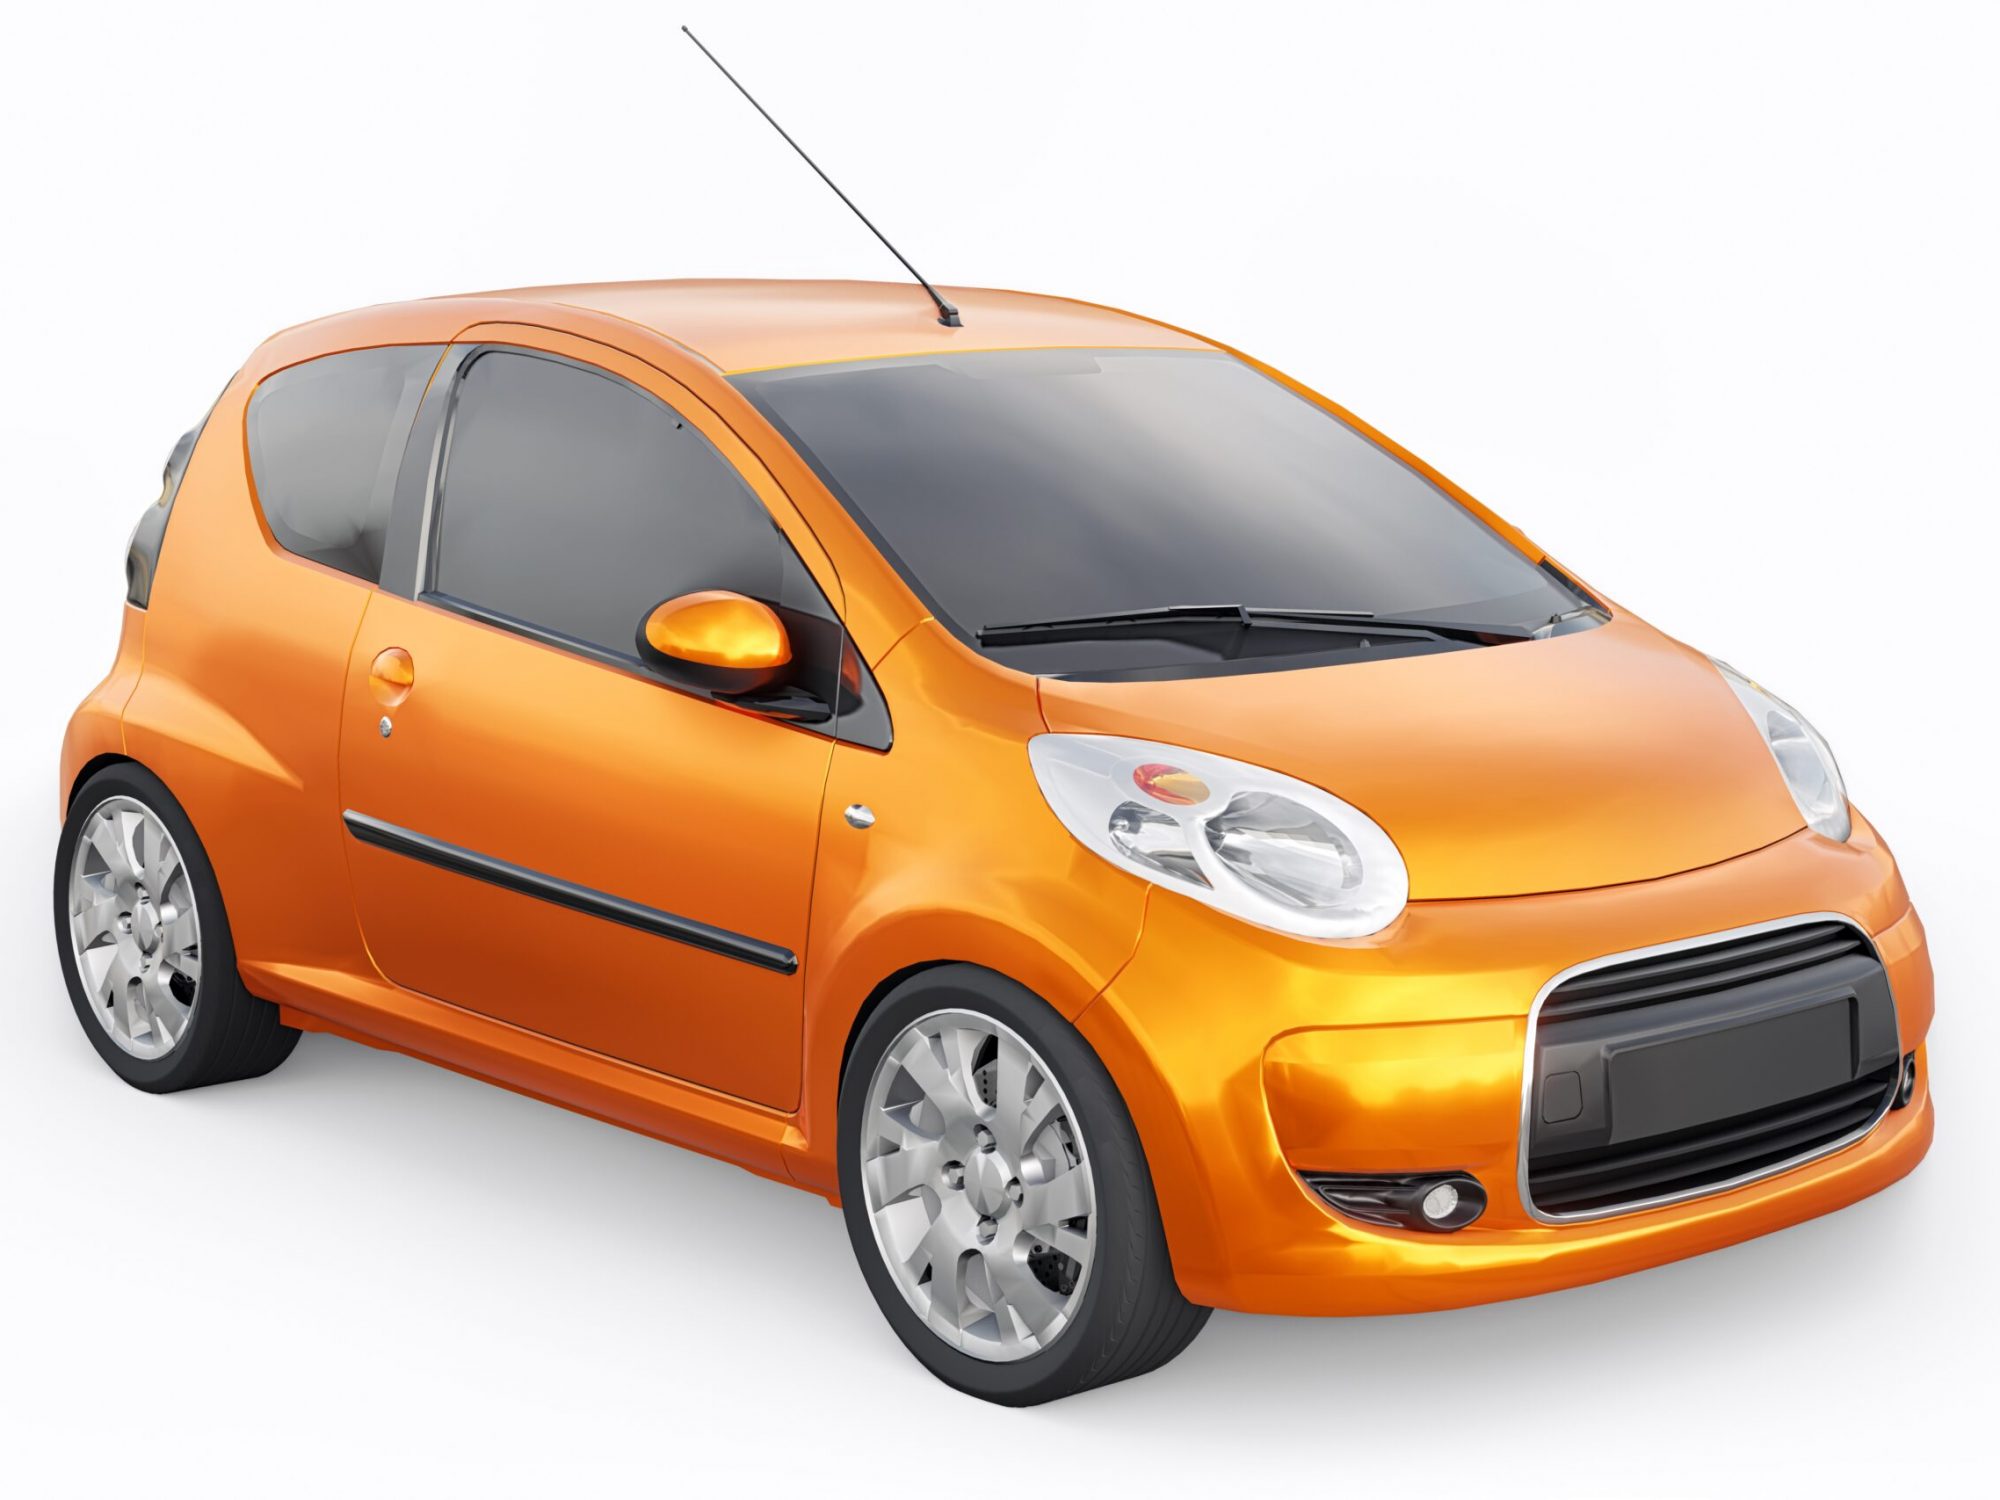 orange metallic ultra compact city car for the cramped streets of historic cities with low fuel consumption. 3d rendering.